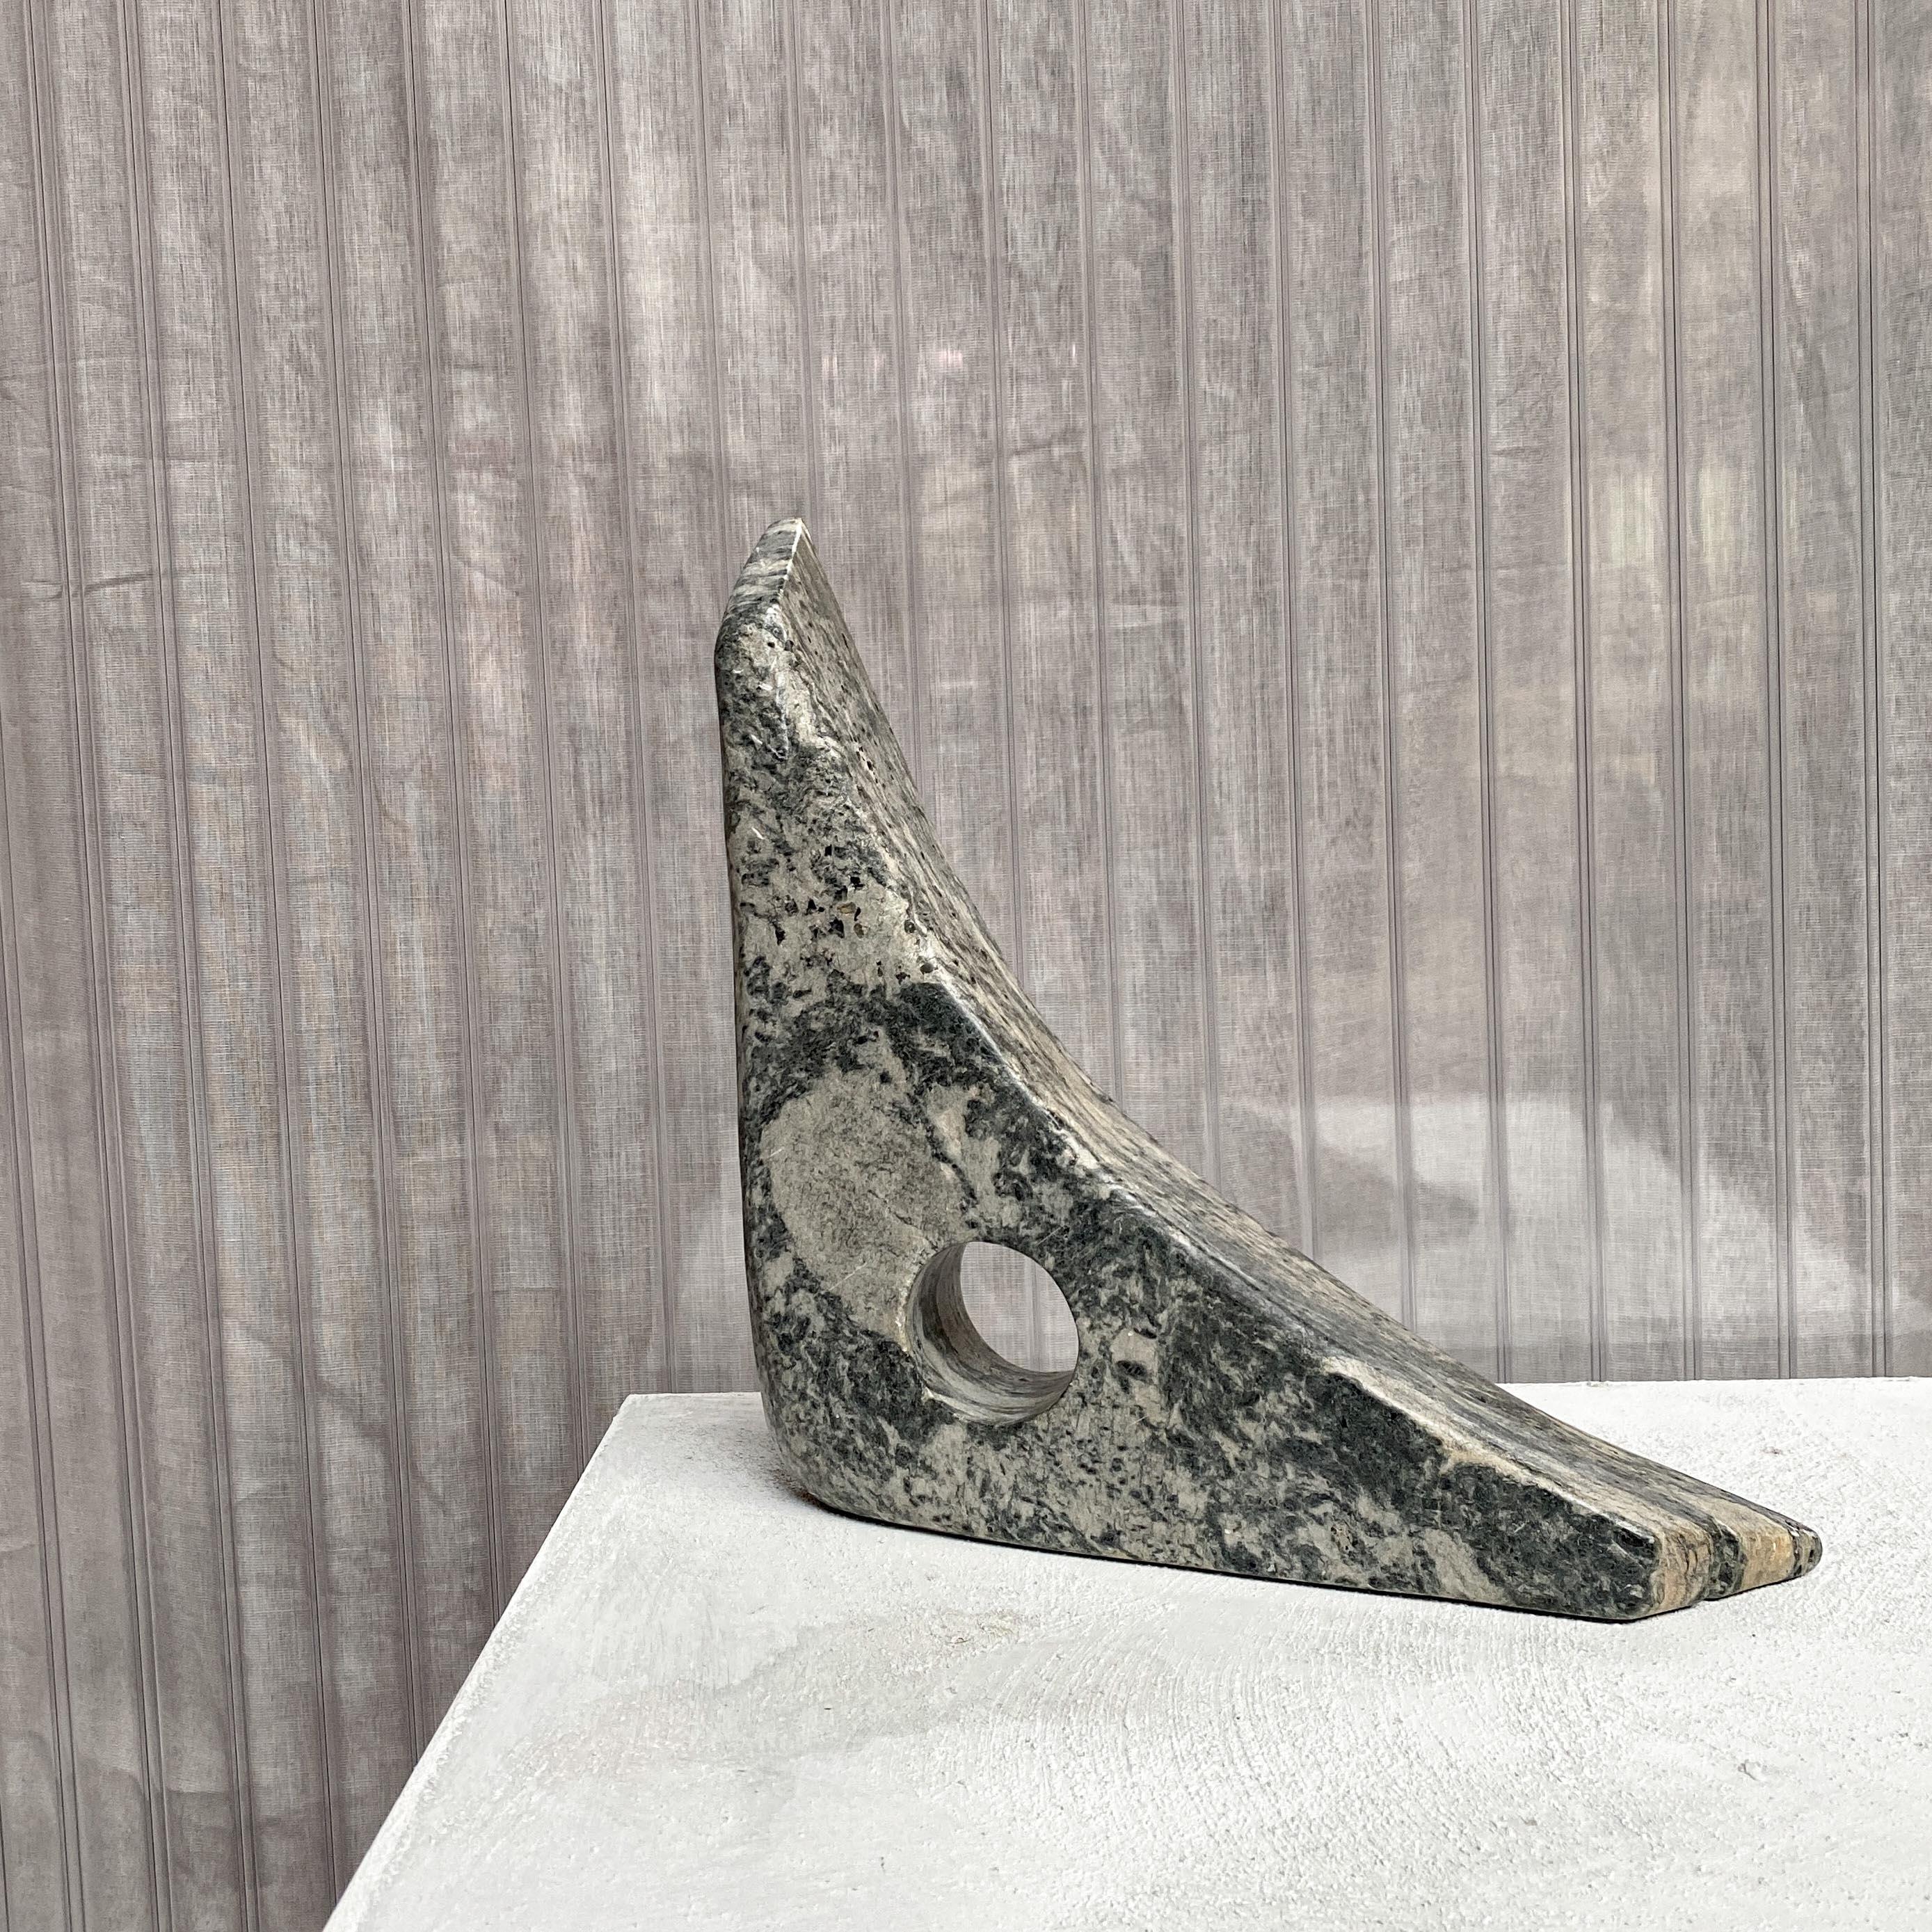 20th Century Modernist Stone Sculpture in Abstract Triangle Shape, 1960s, Noguchi Style